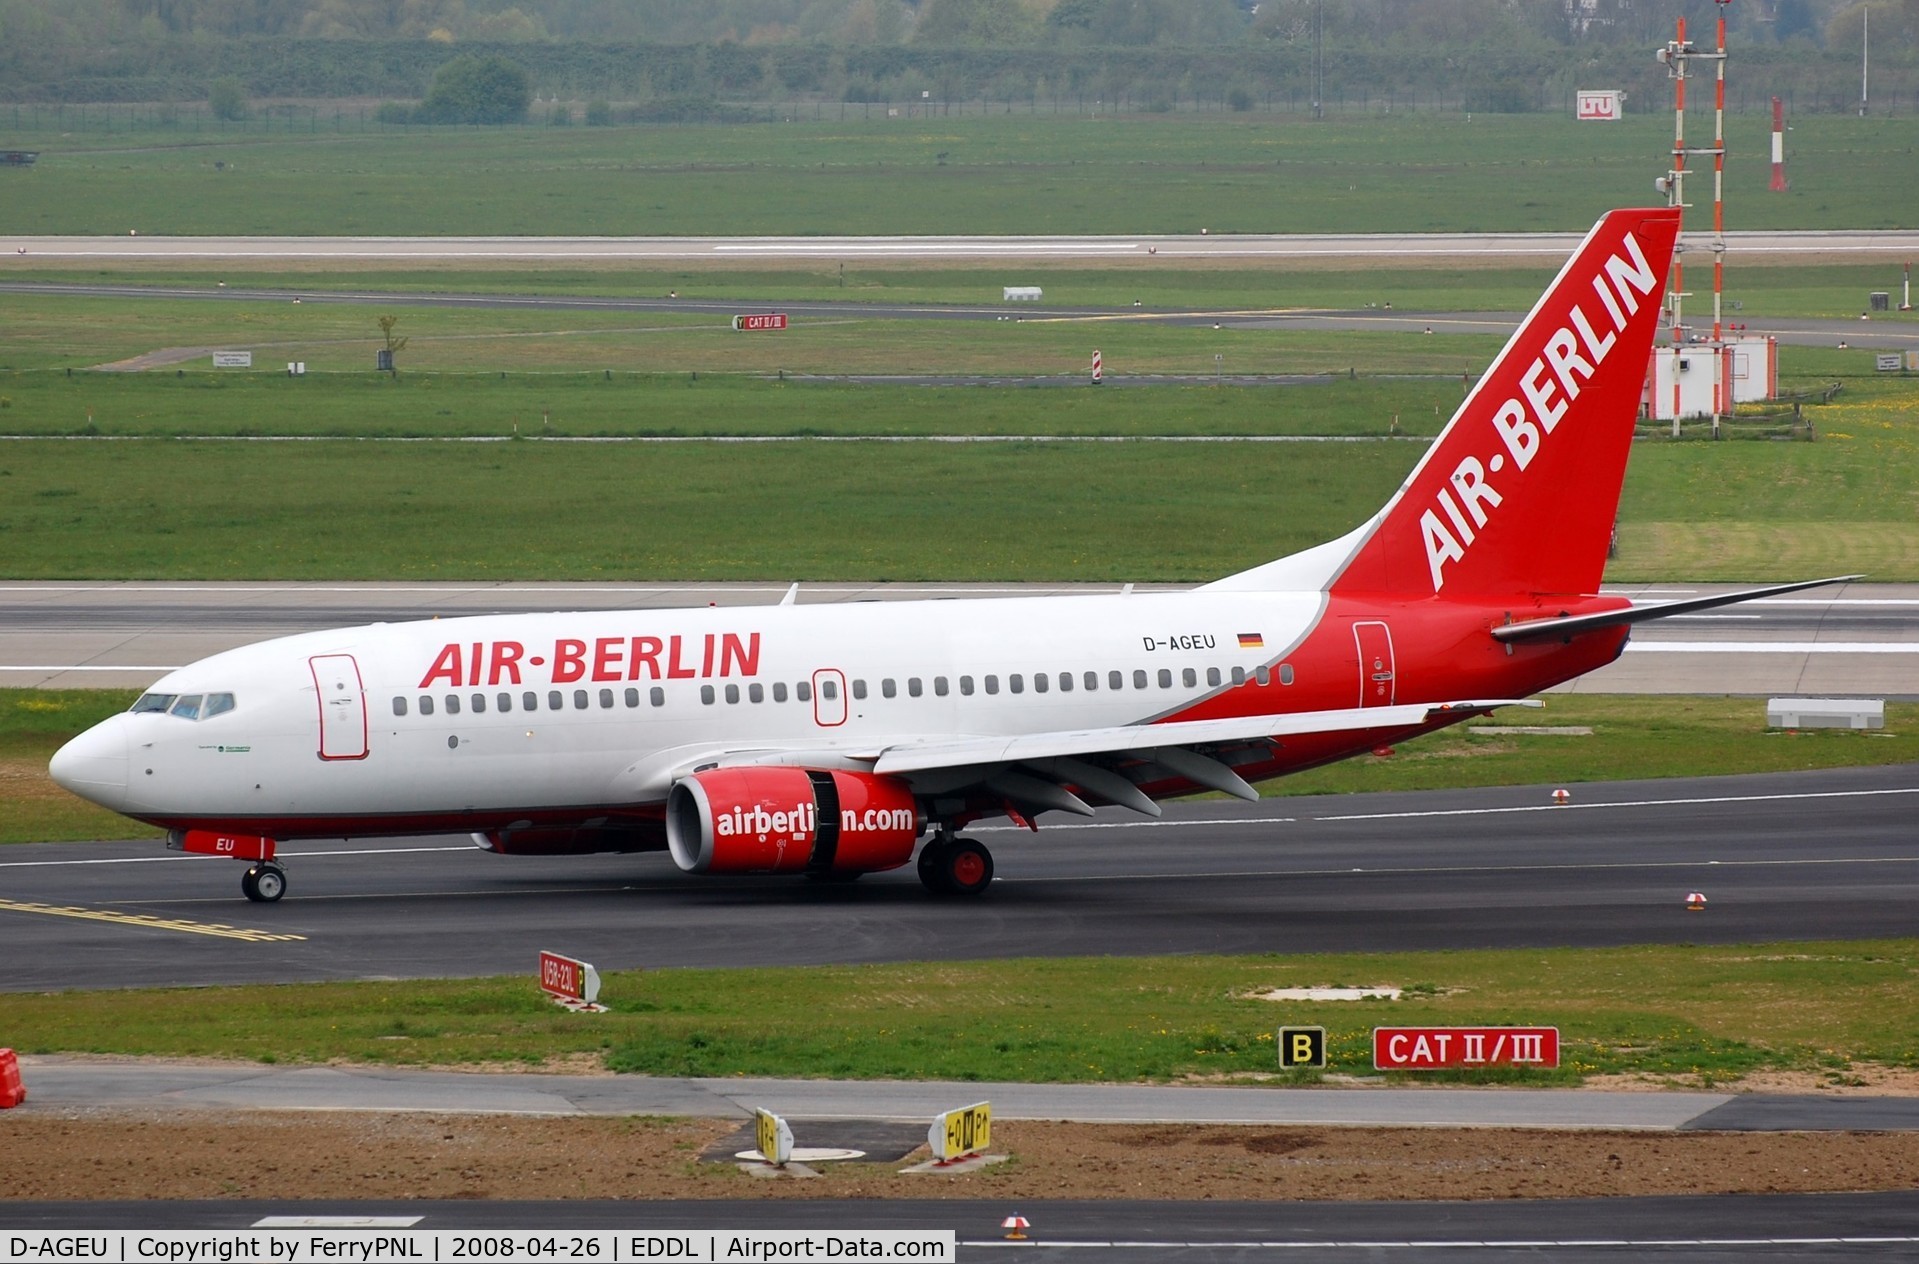 D-AGEU, 1998 Boeing 737-75B C/N 28104, Germania B737 operated for Air Berlin. Aircraft stored in 2018.